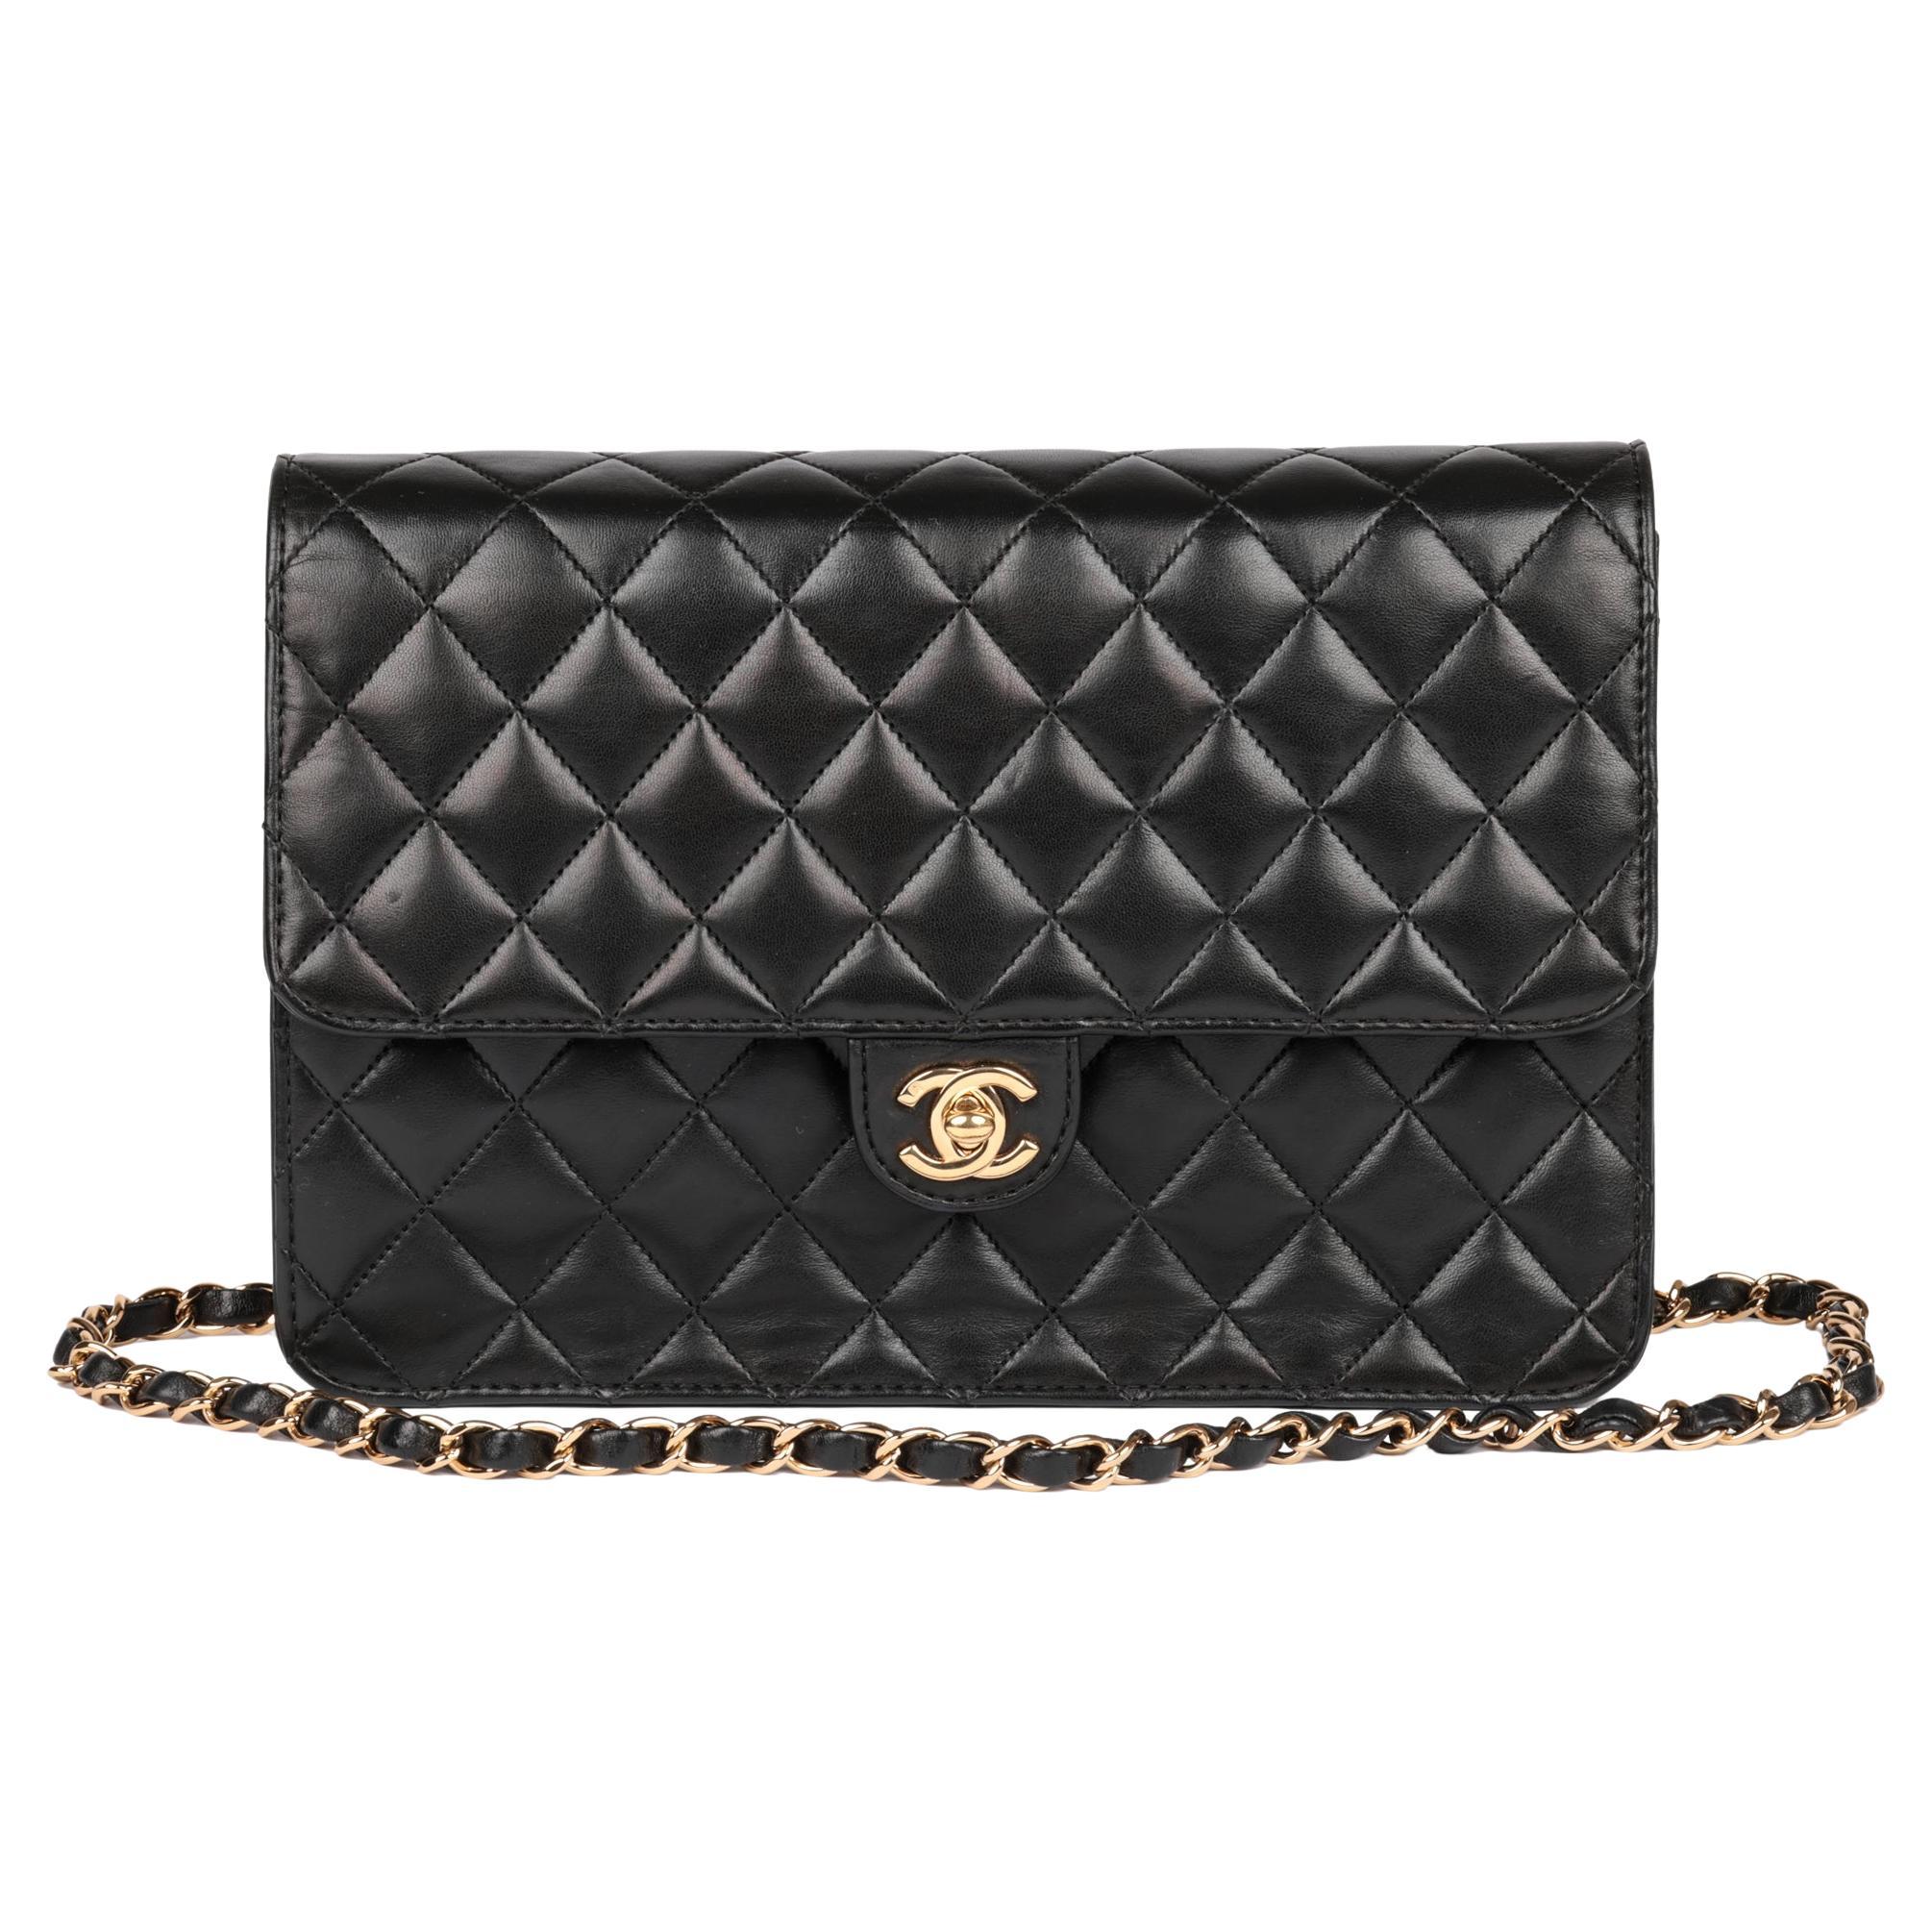 CHANEL Black Quilted Lambskin Medium Classic Single Flap Bag at